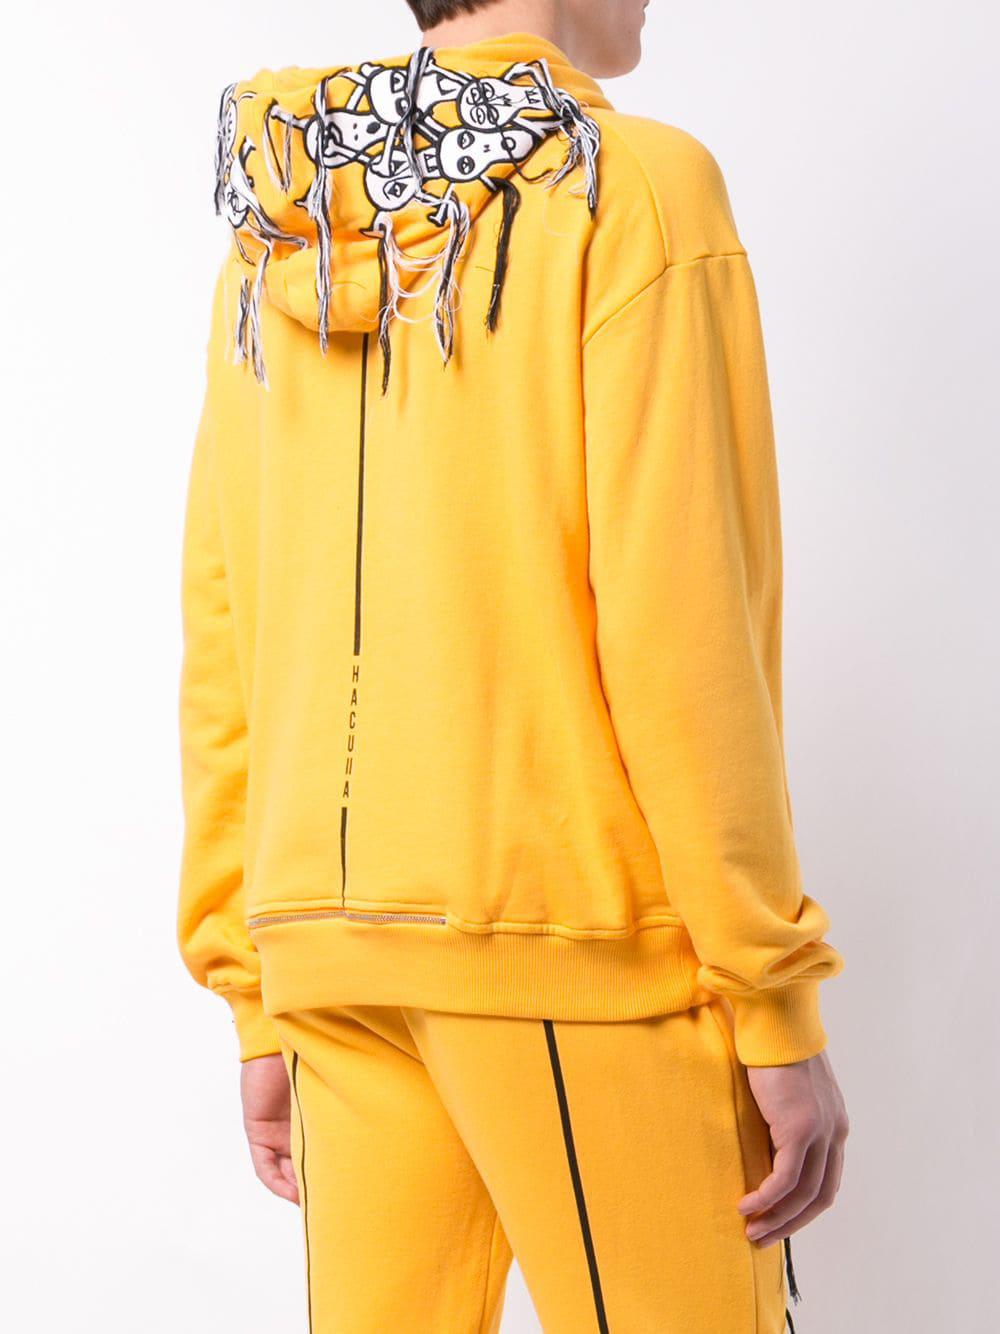 Haculla Cotton Chaos Sweatshirt Hoodie in Yellow for Men - Save 24% - Lyst